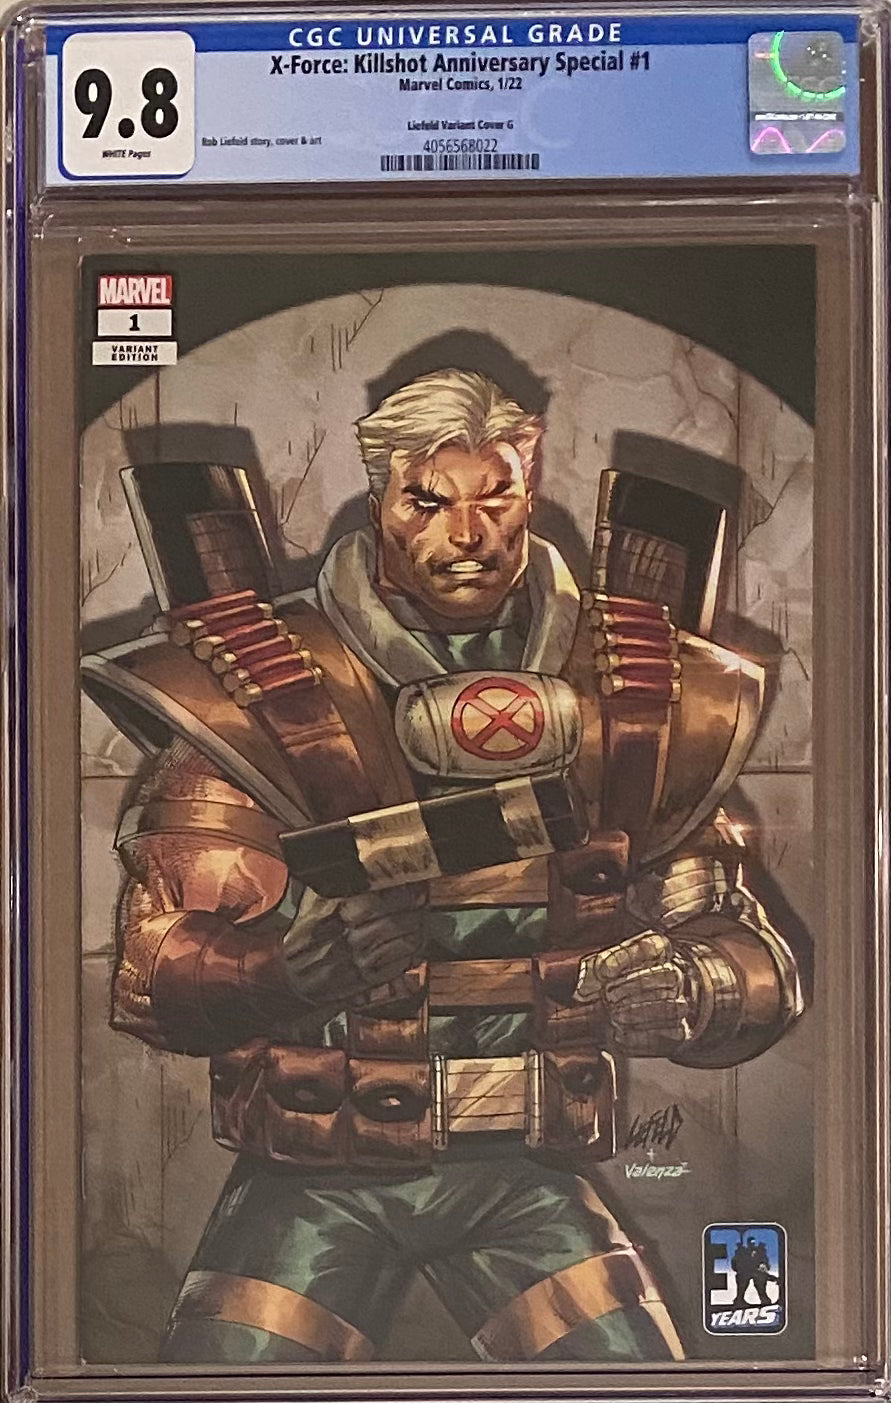 X-Force Killshot Anniversary Special #1 "Cable" Connecting Variant CGC 9.8